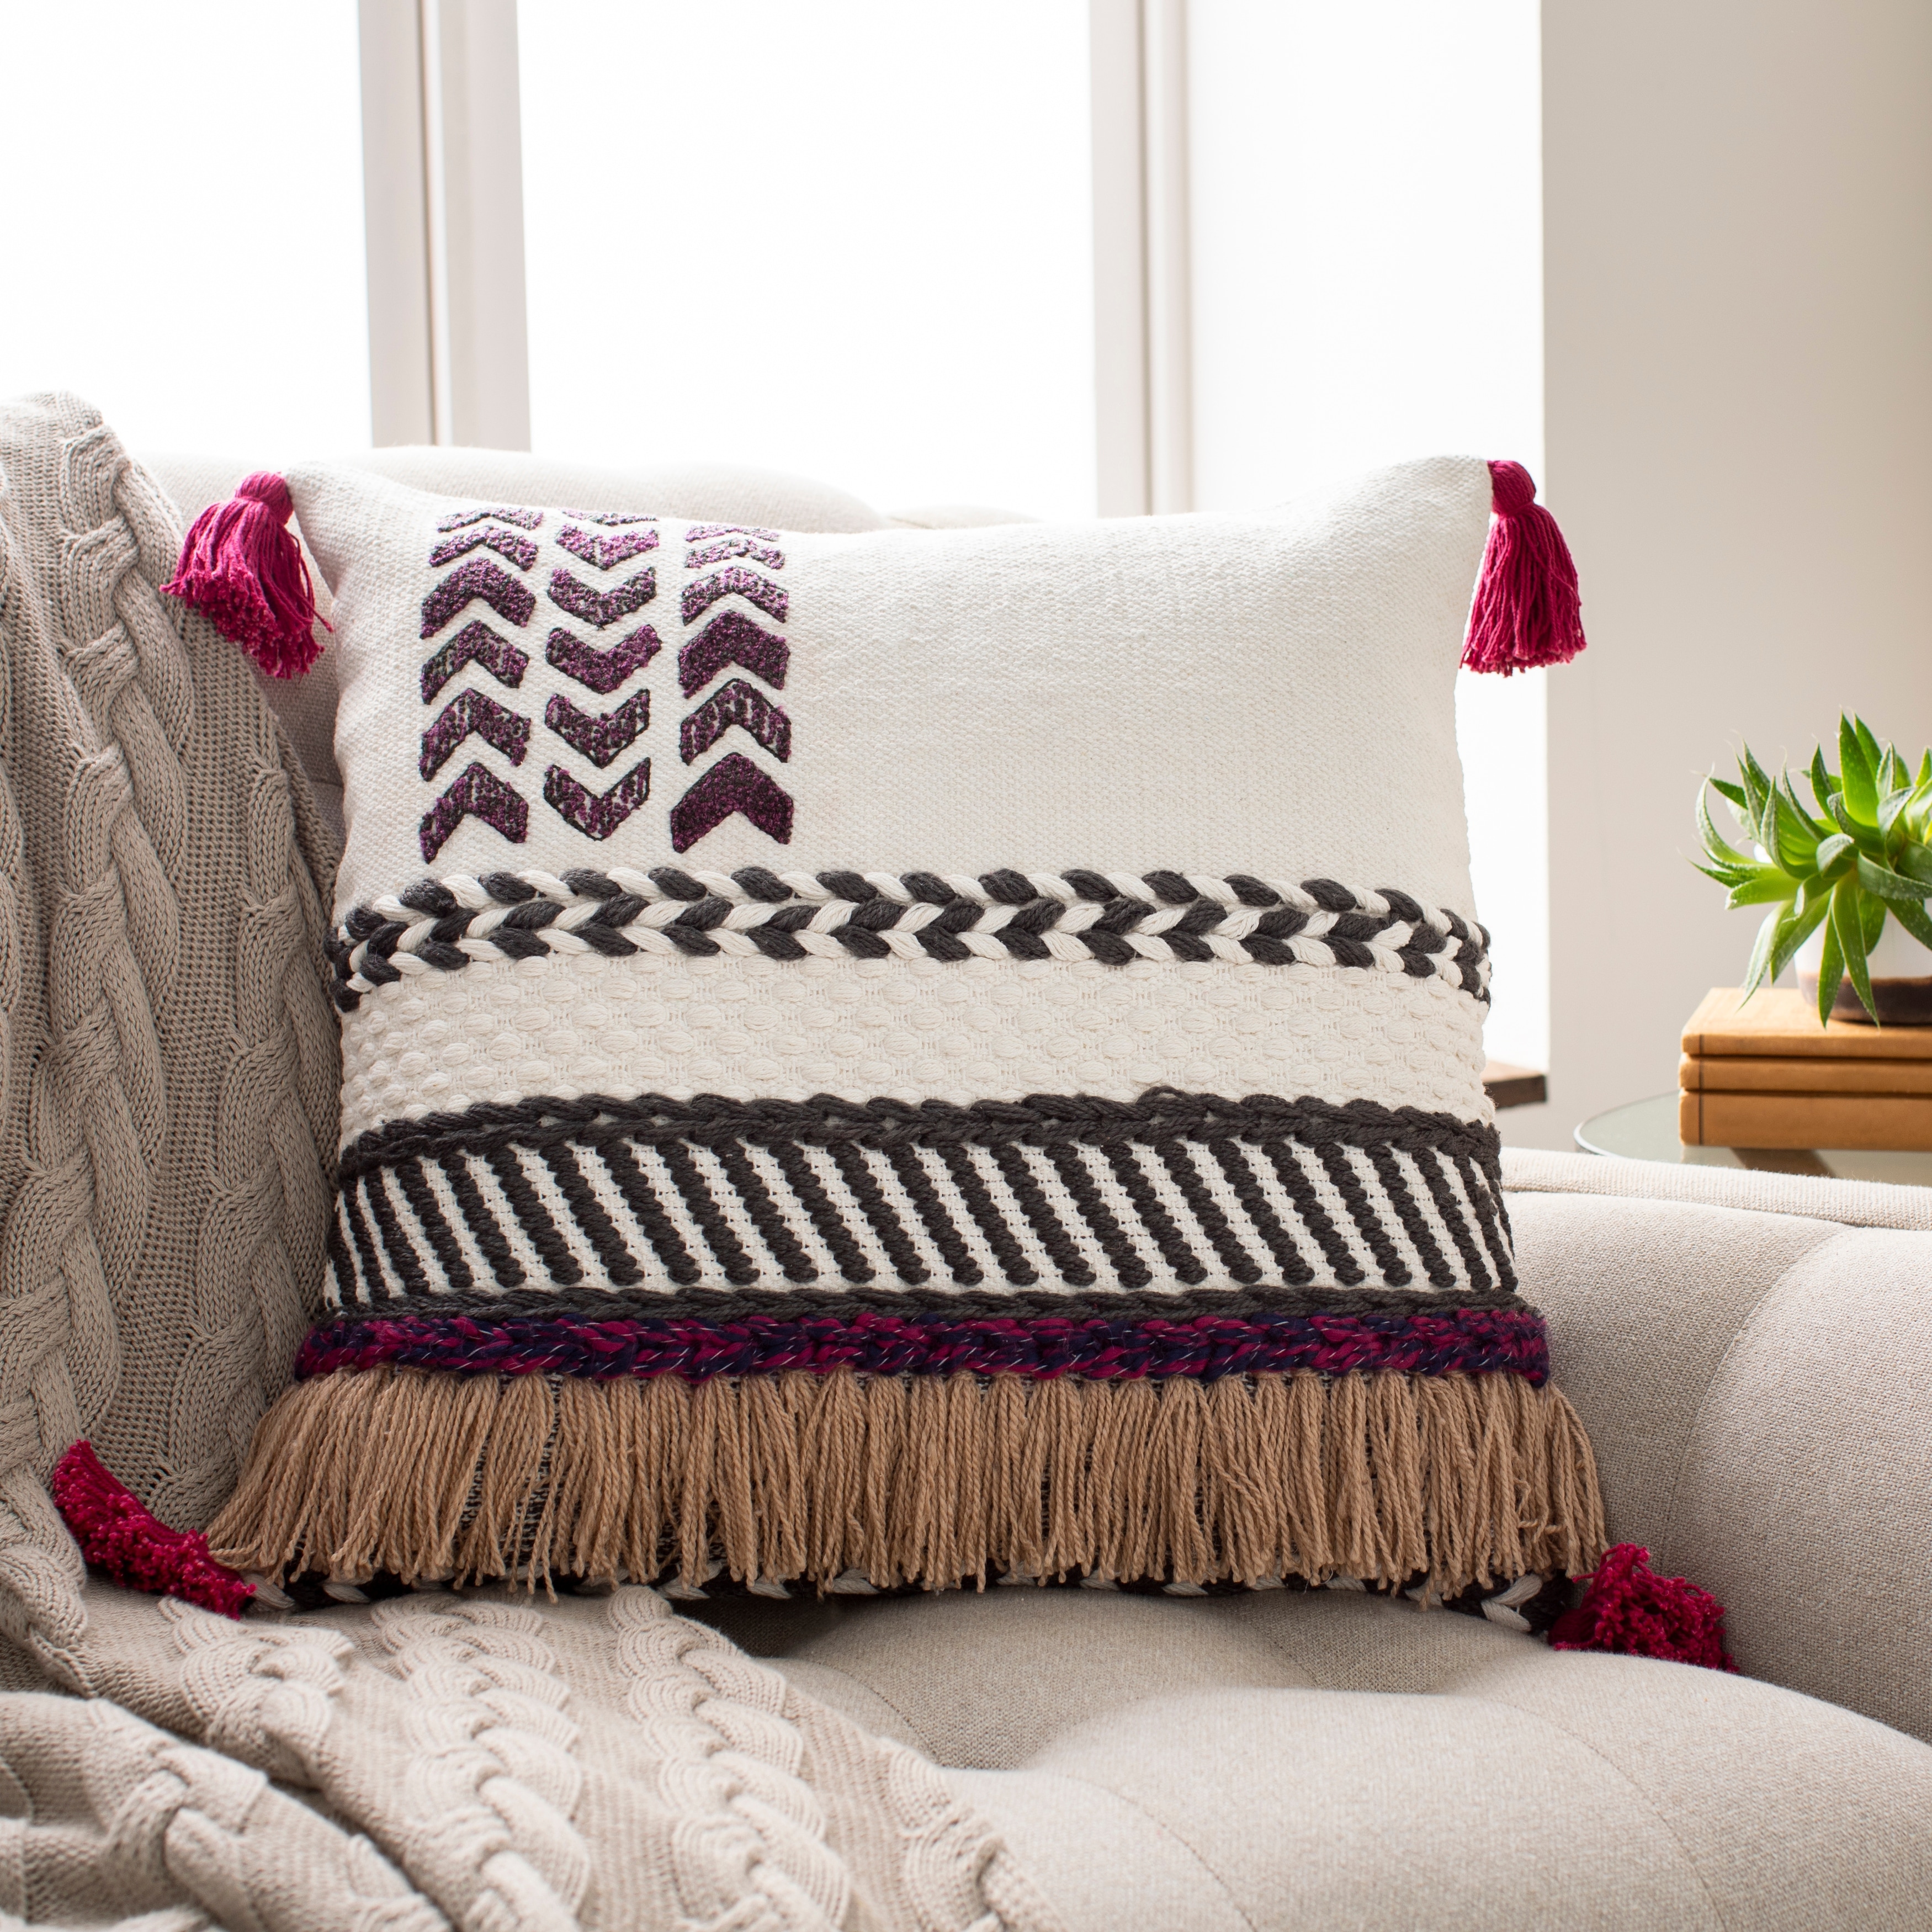 https://ak1.ostkcdn.com/images/products/is/images/direct/fd6c1d78949a1a61e56556f3fdc4d806829b15ce/Vernita-Embroidered-Textured-Tassel-Throw-Pillow.jpg